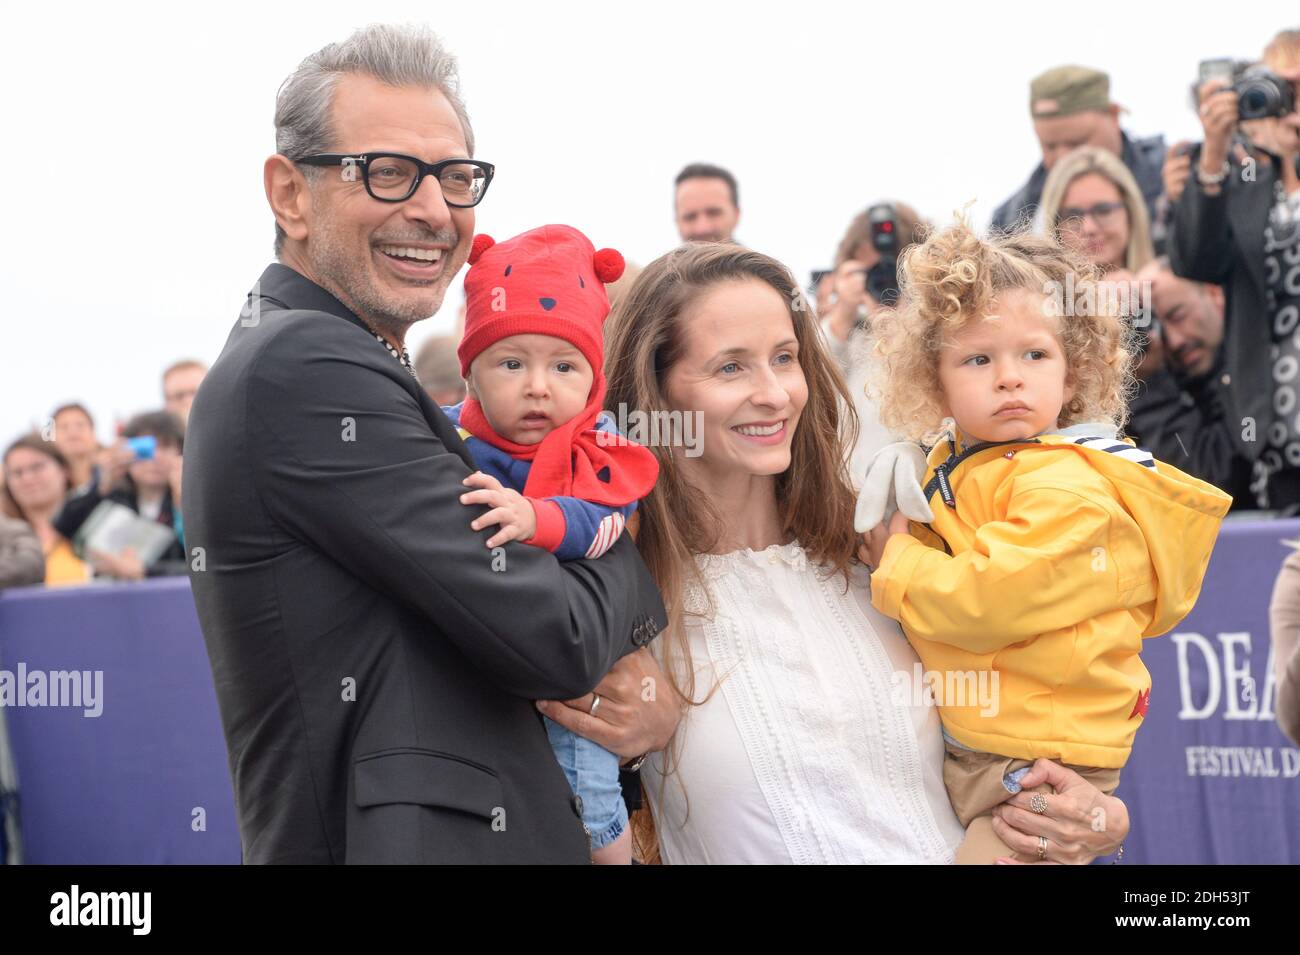 Jeff Goldblum with his wife Emilie Livingston and their children Charlie Ocean and River Joe attending a photocall at the 43rd American Film Festival of Deauville, in Deauville, France on September 3rd, 2017. Photo by Julien Reynaud/APS-Medias/ABACAPRESS.COM Stock Photo